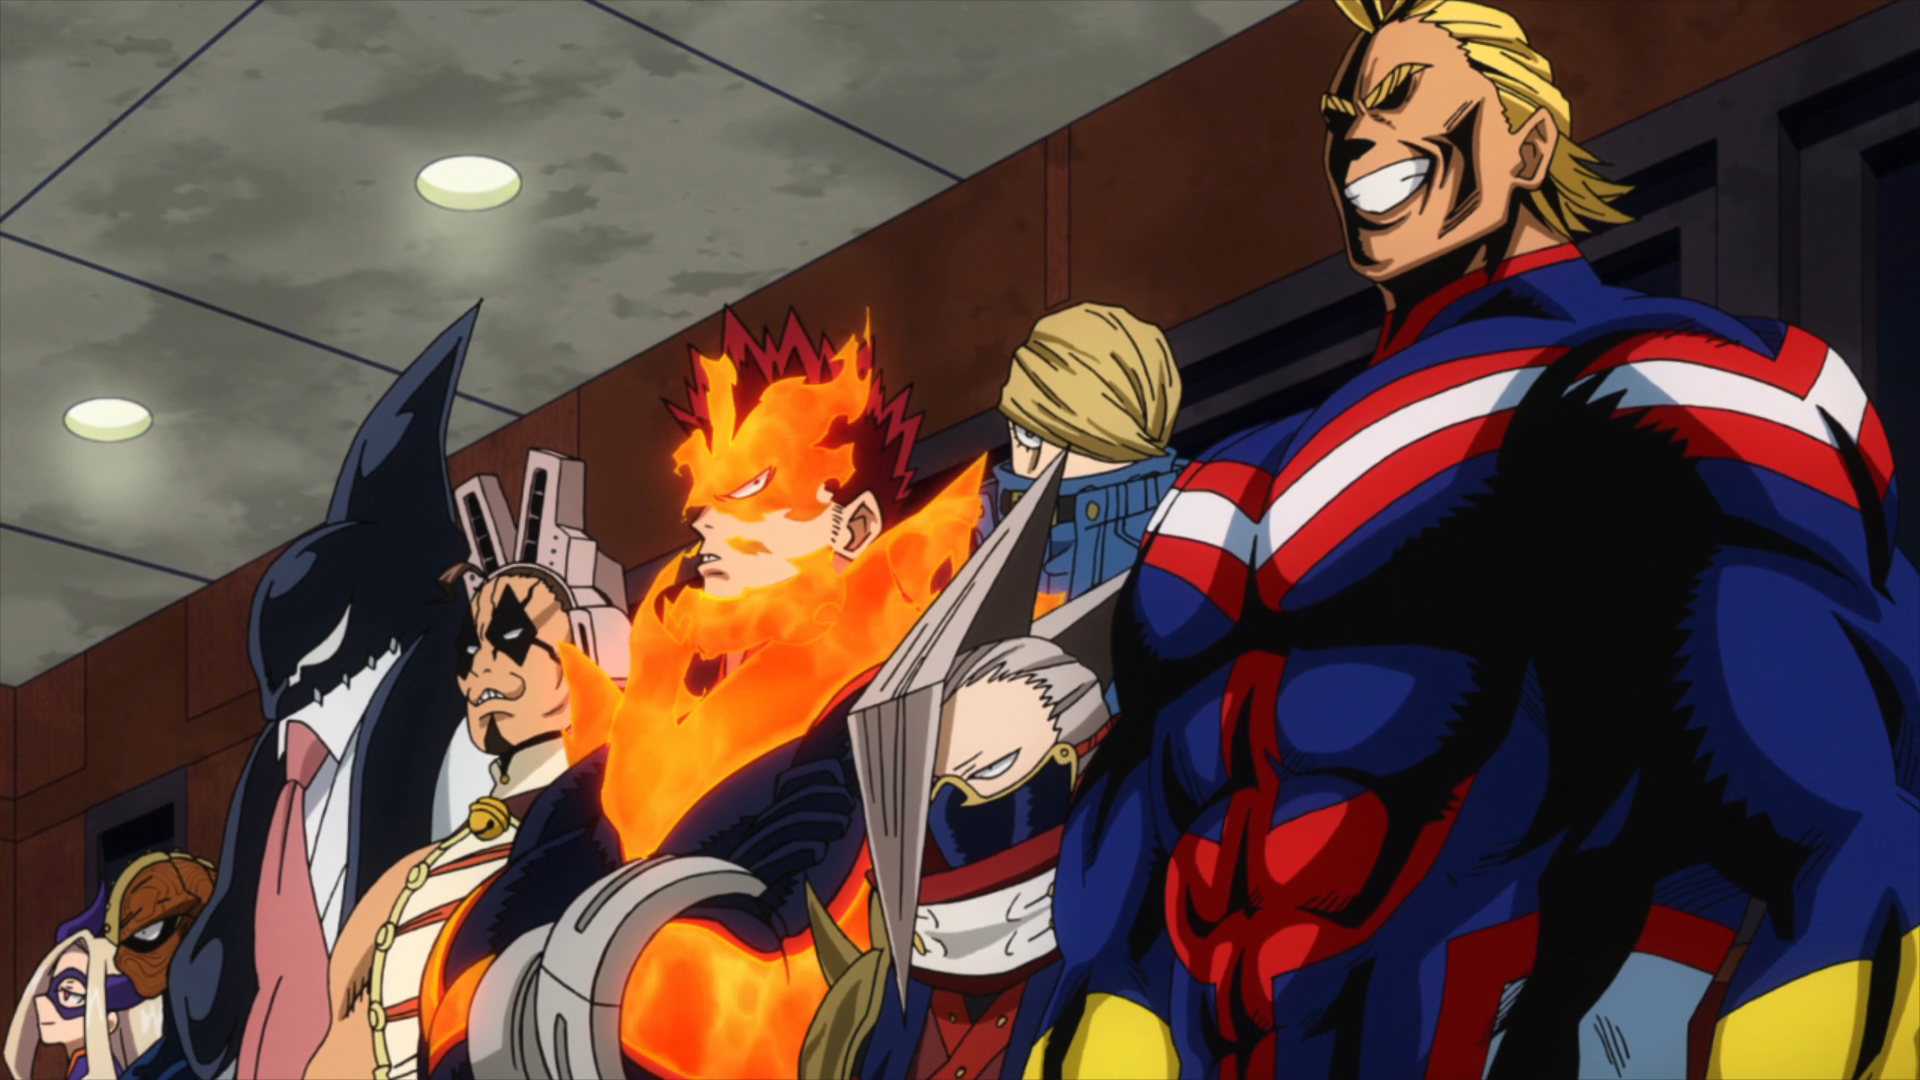 The Biggest Flaws With My Hero Academia's Hero Society